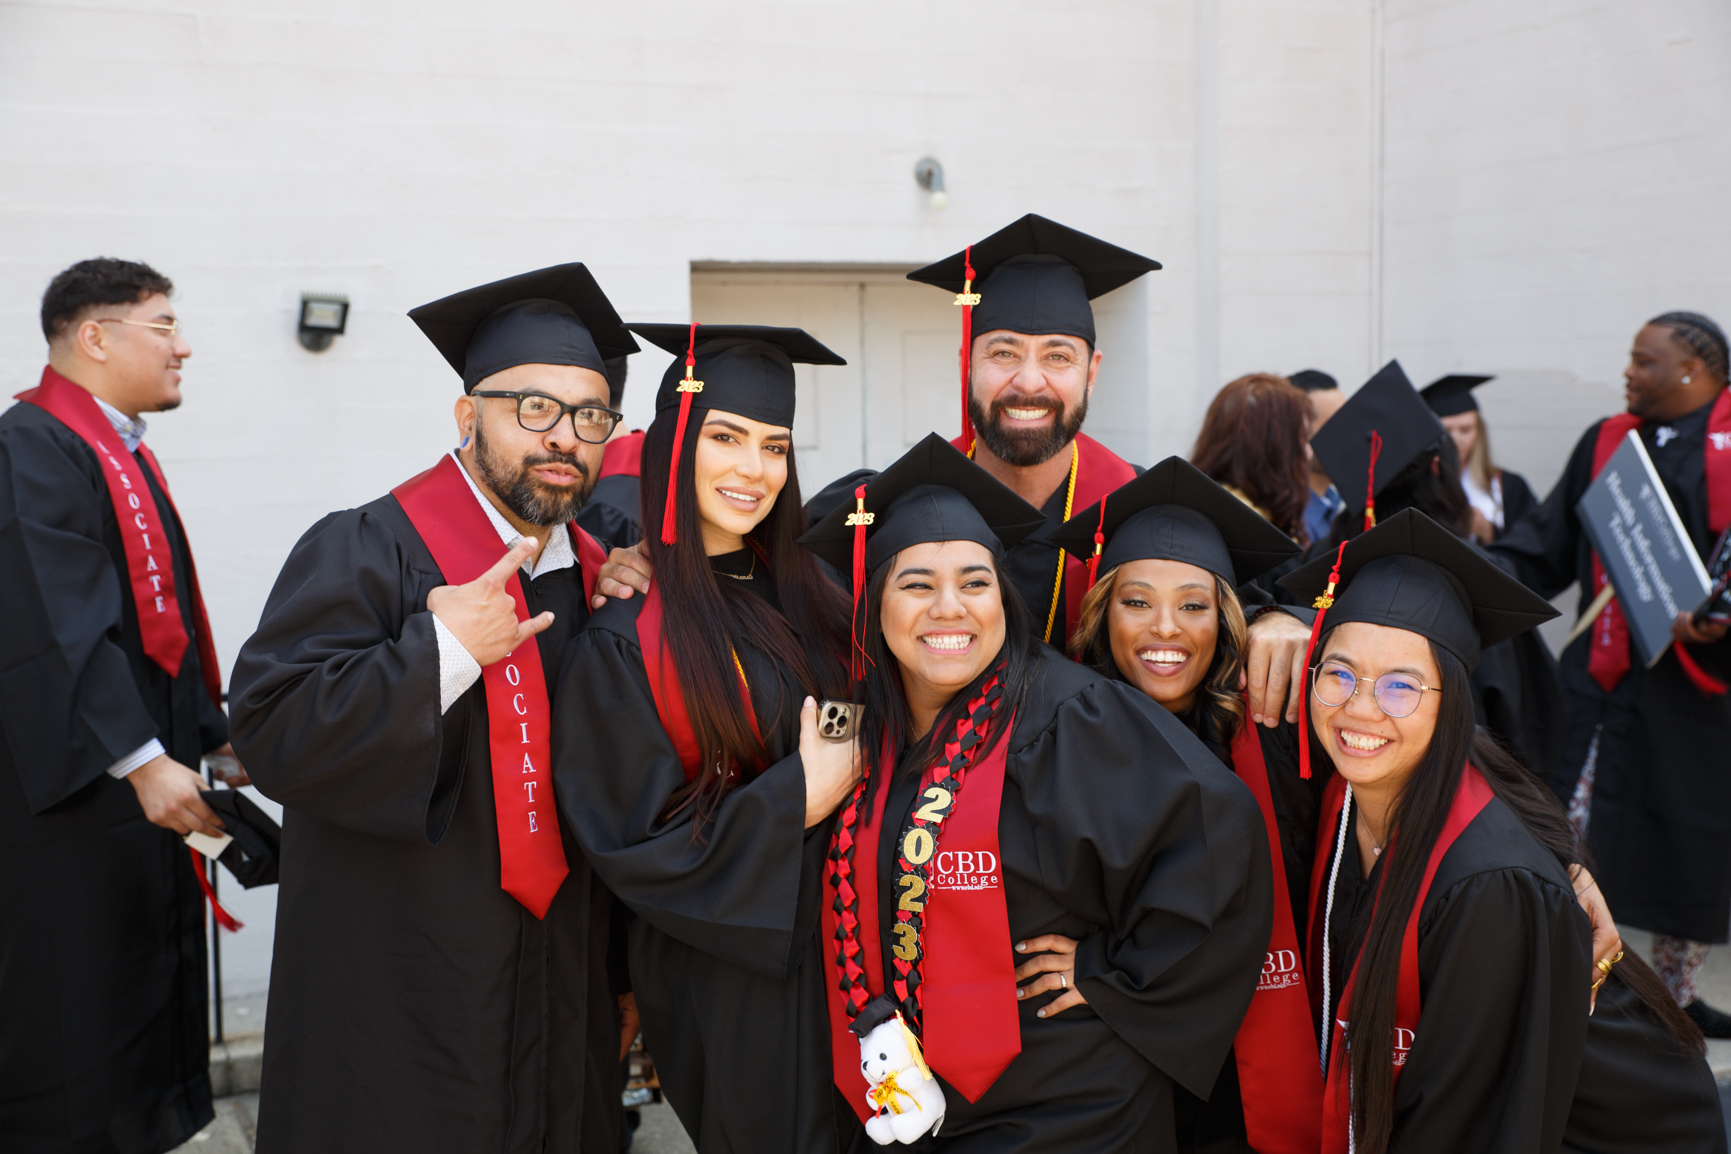 A group of CBD College graduates are smiling happily, radiating joy and satisfaction as they celebrate their achievements together. Their smiles reflect the pride and camaraderie shared among them, marking the culmination of their educational journey and the beginning of new opportunities in their respective careers.